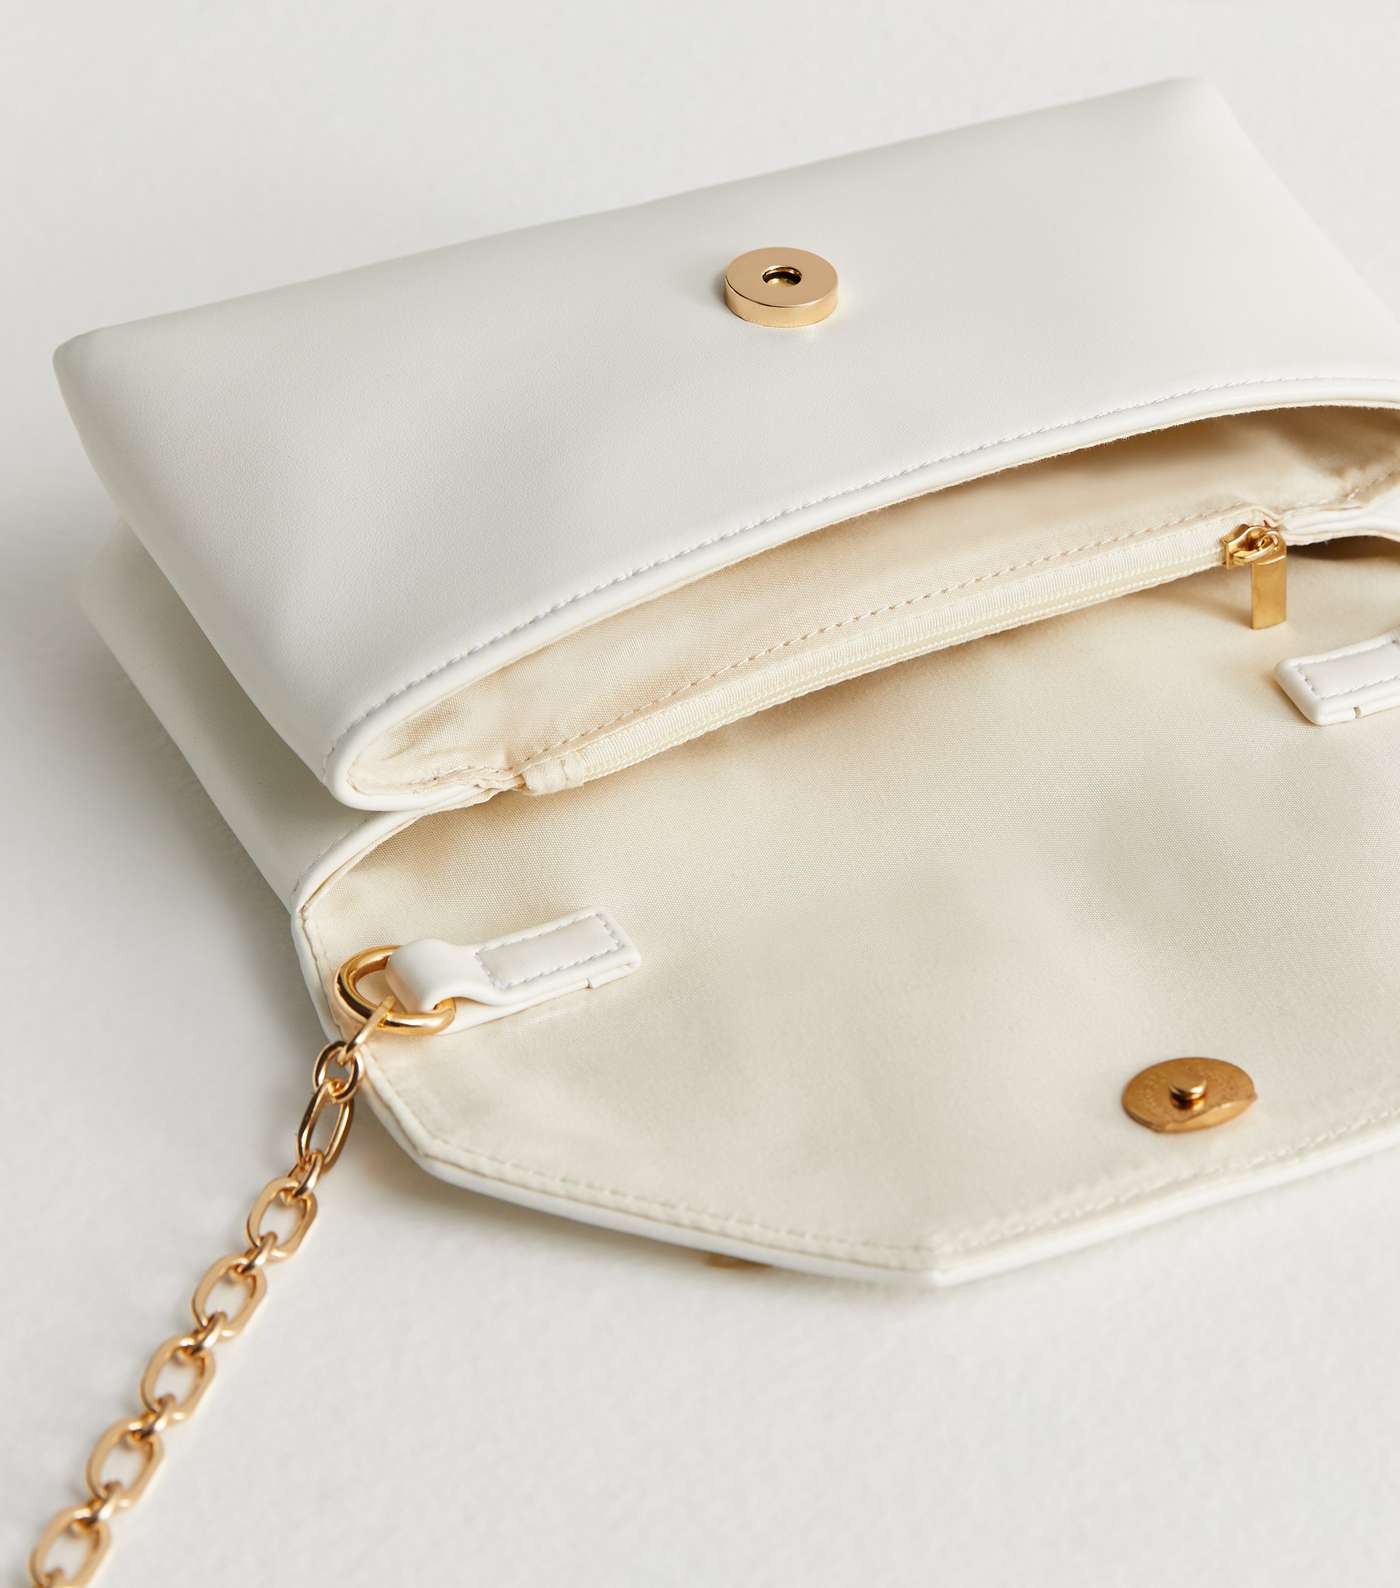 Cream Leather-Look Clutch Bag Image 5